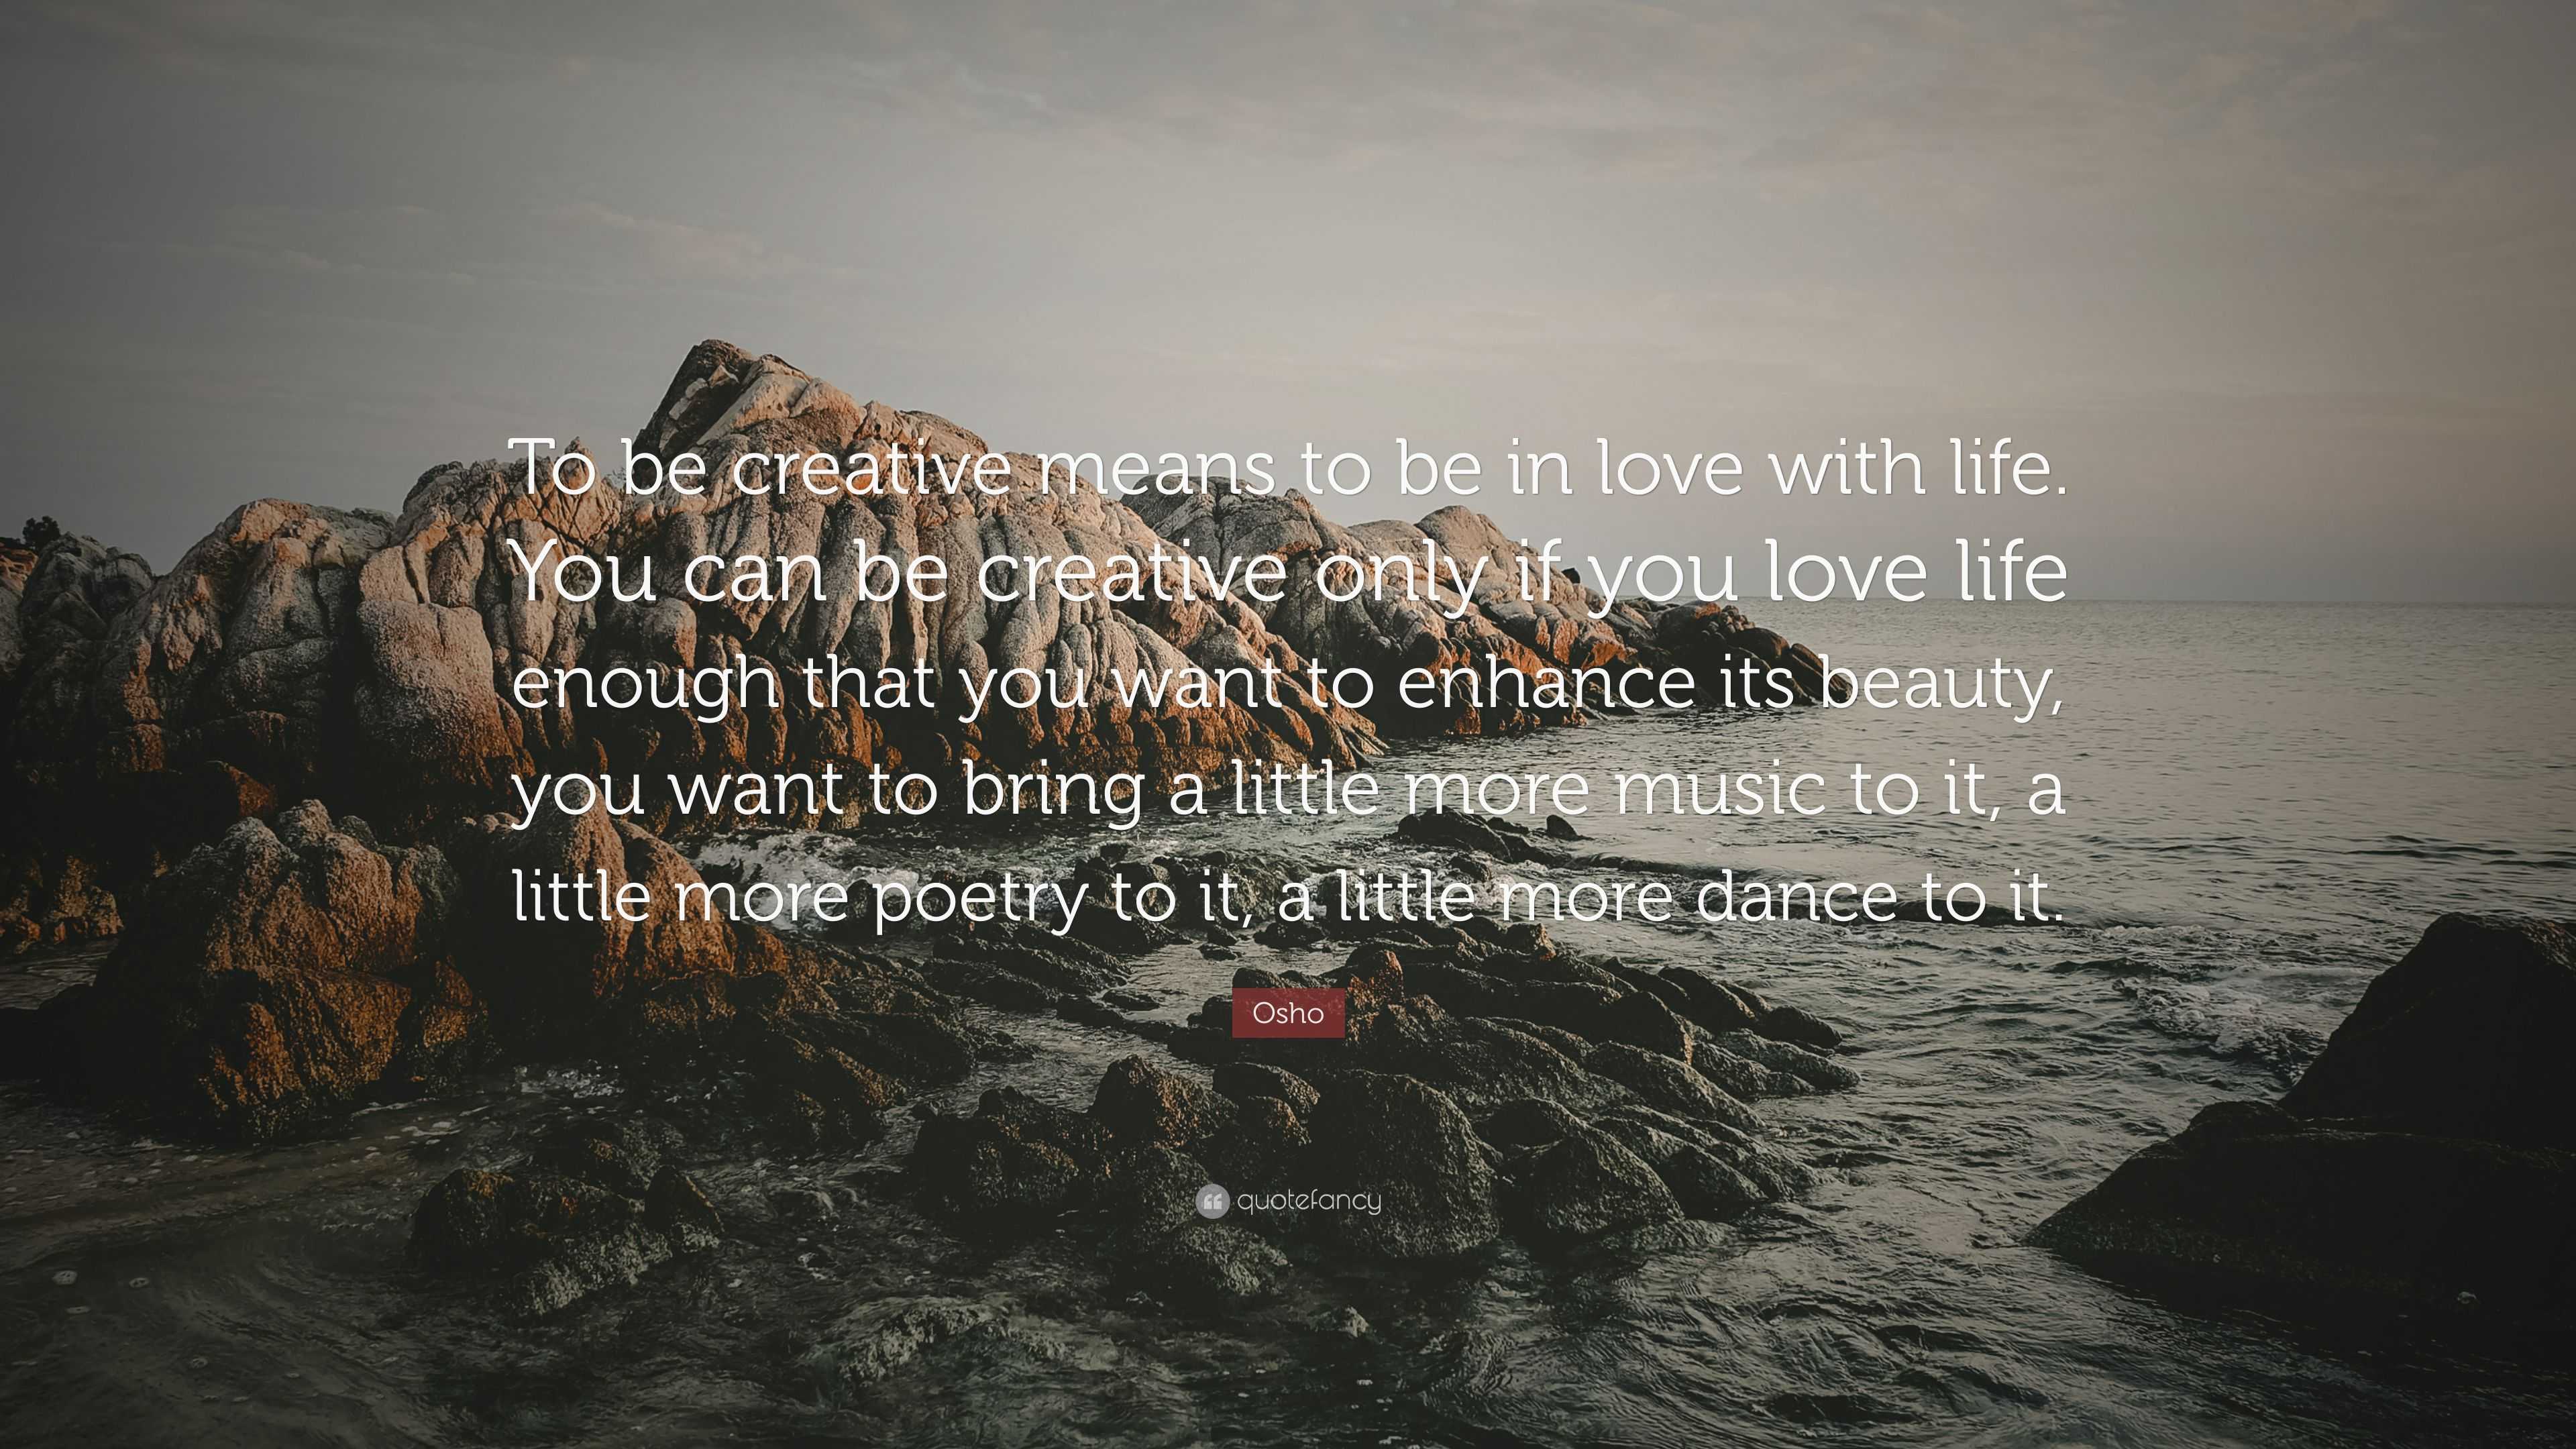 Osho Quote “To be creative means to be in love with life You